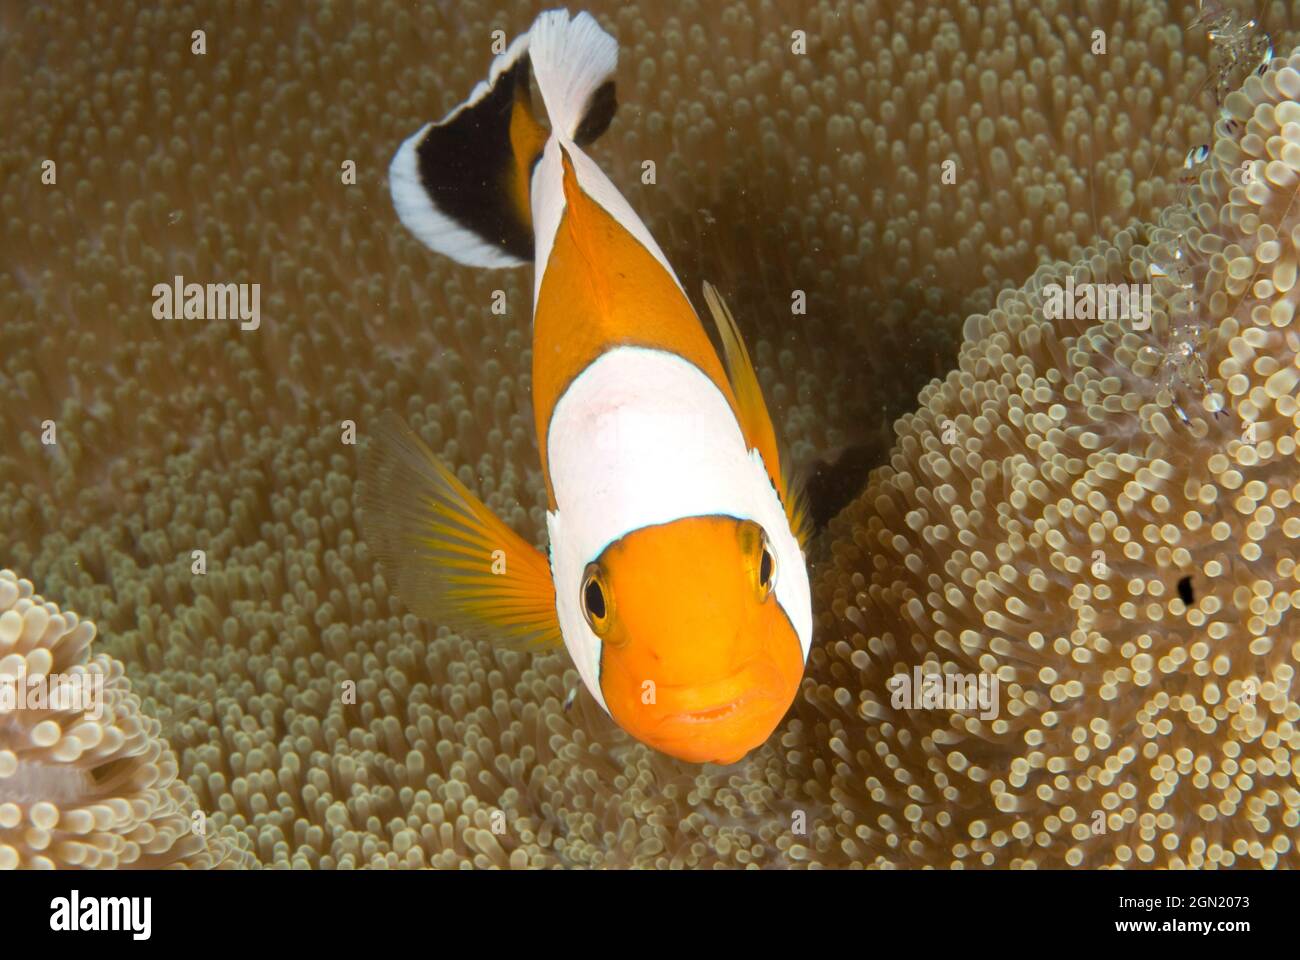 Saddleback clownfish (Amphiprion polymnus), on Saddle carpet anemone (Stichodactyla haddoni), a short-tentacled anemone that can pull rapidly under th Stock Photo